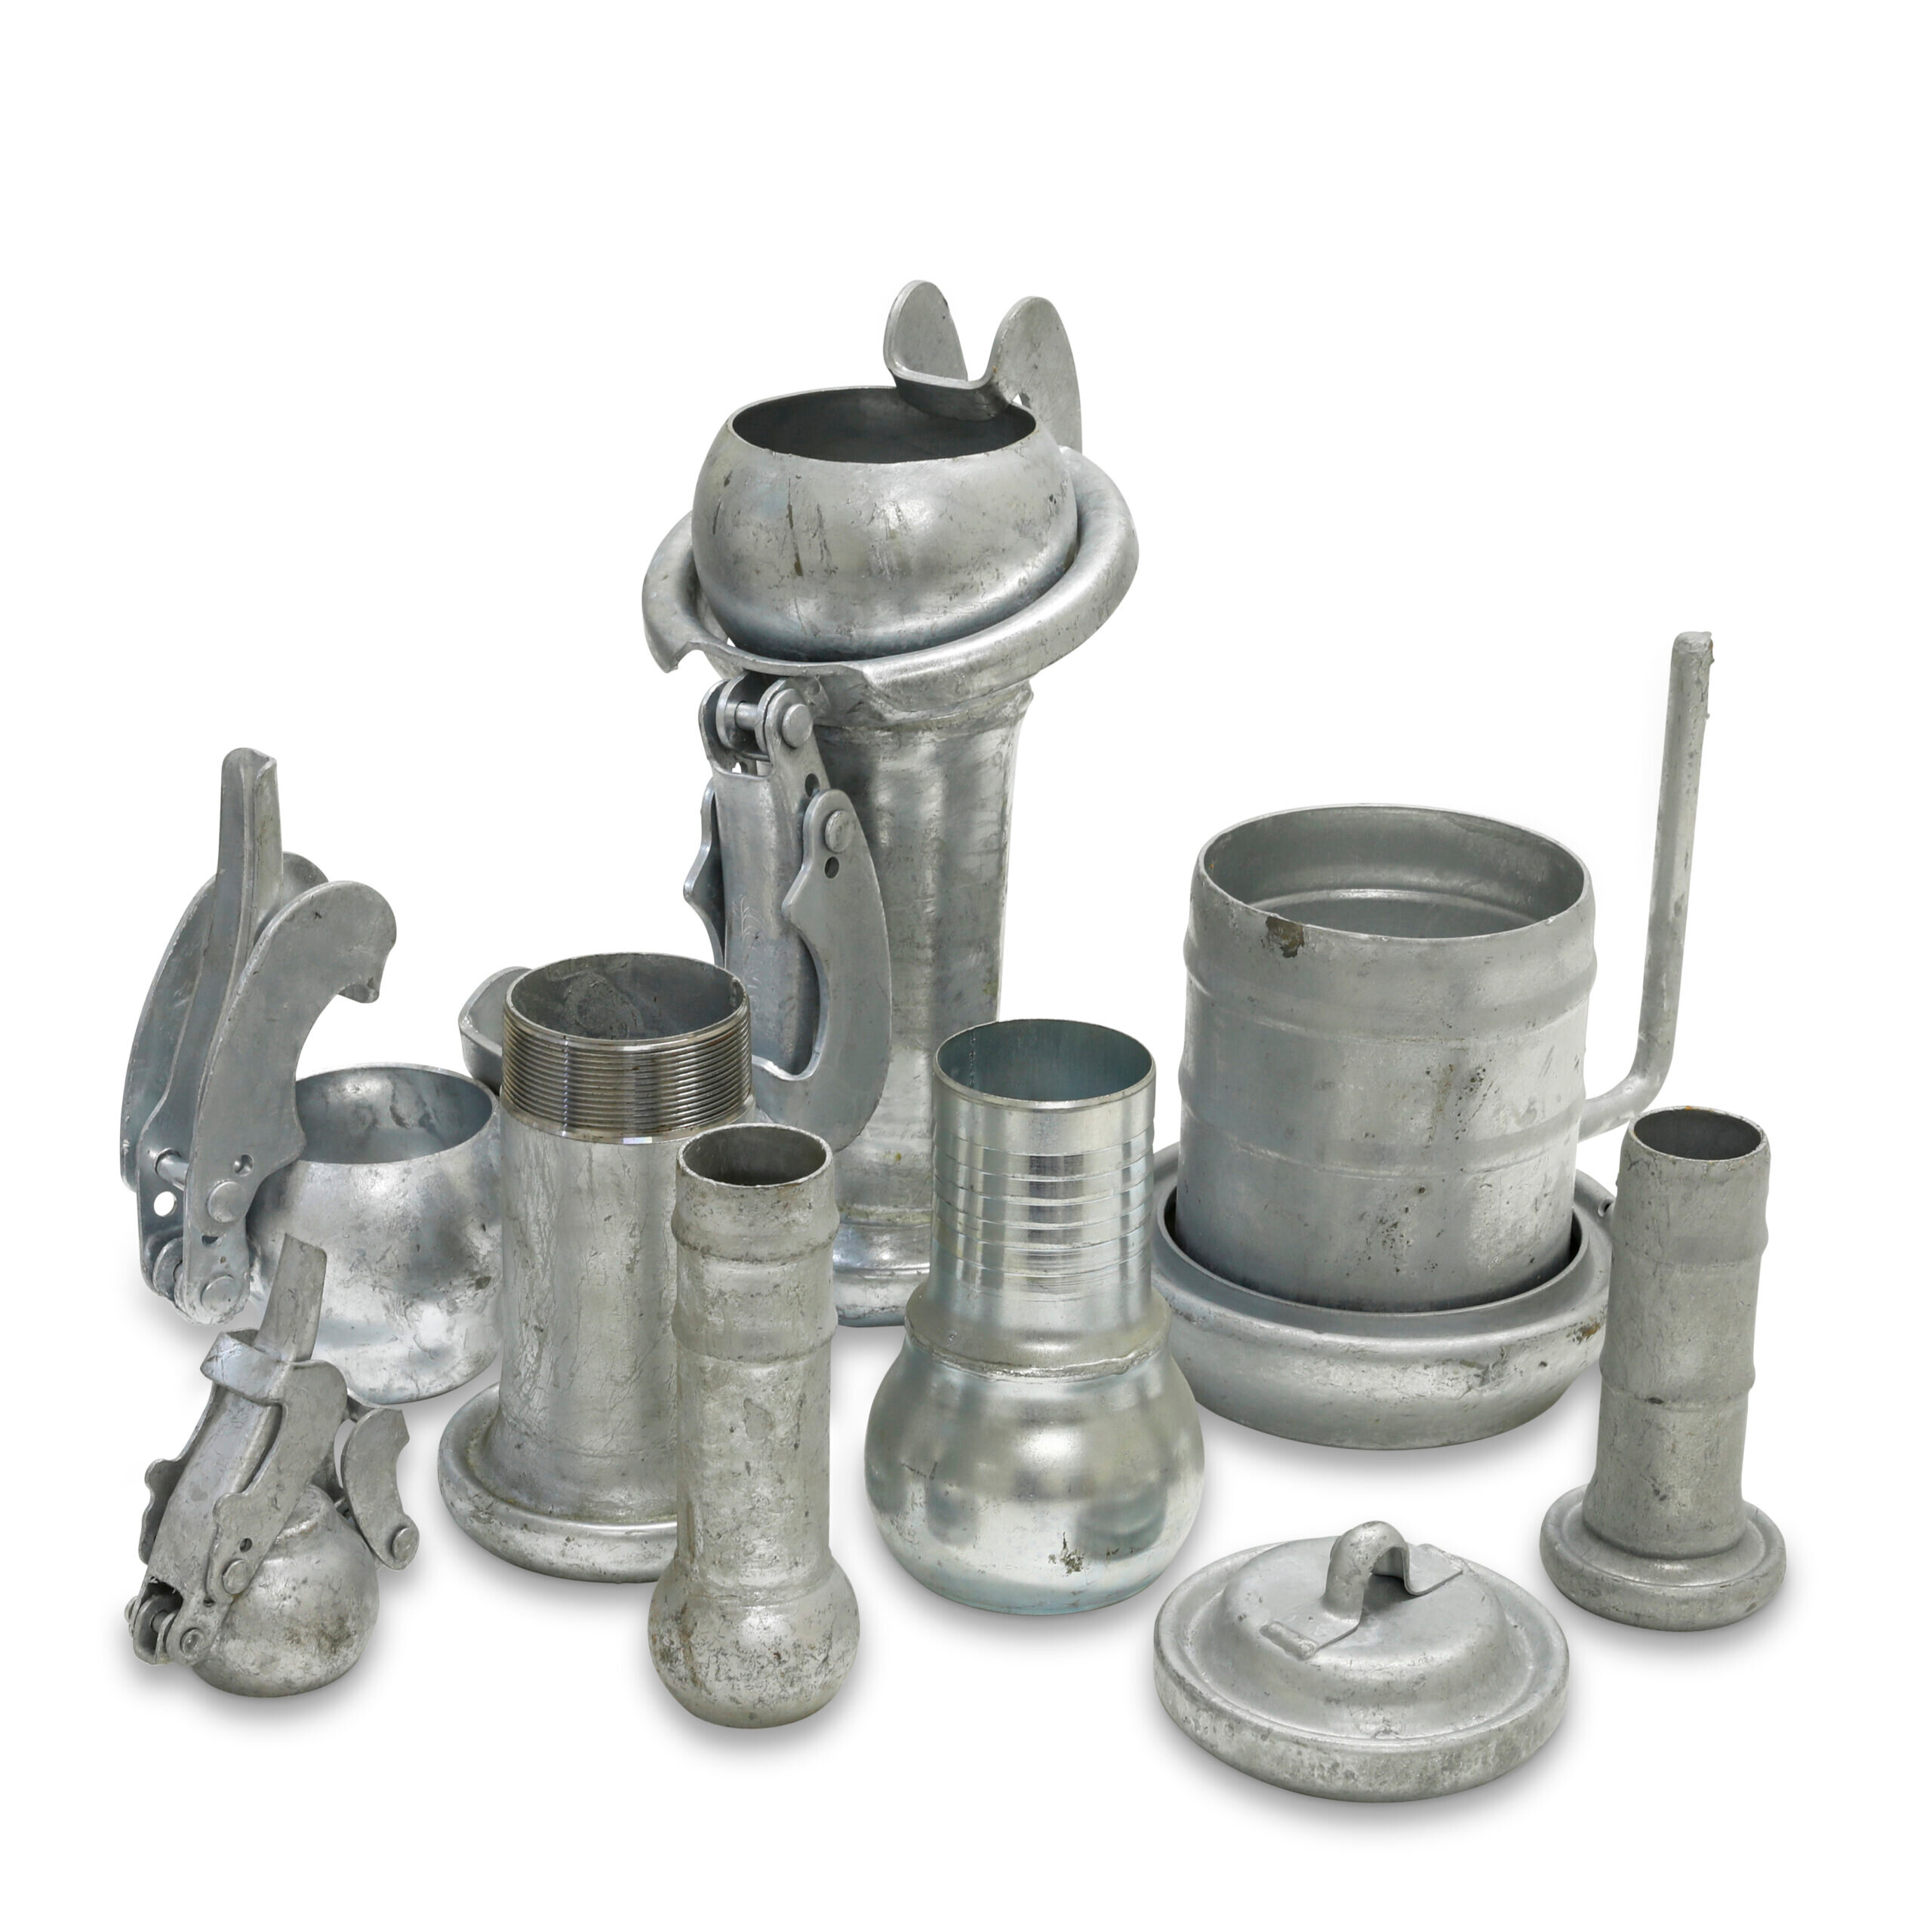 A diverse collection of metal pipe fittings for fluid transfer solutions.